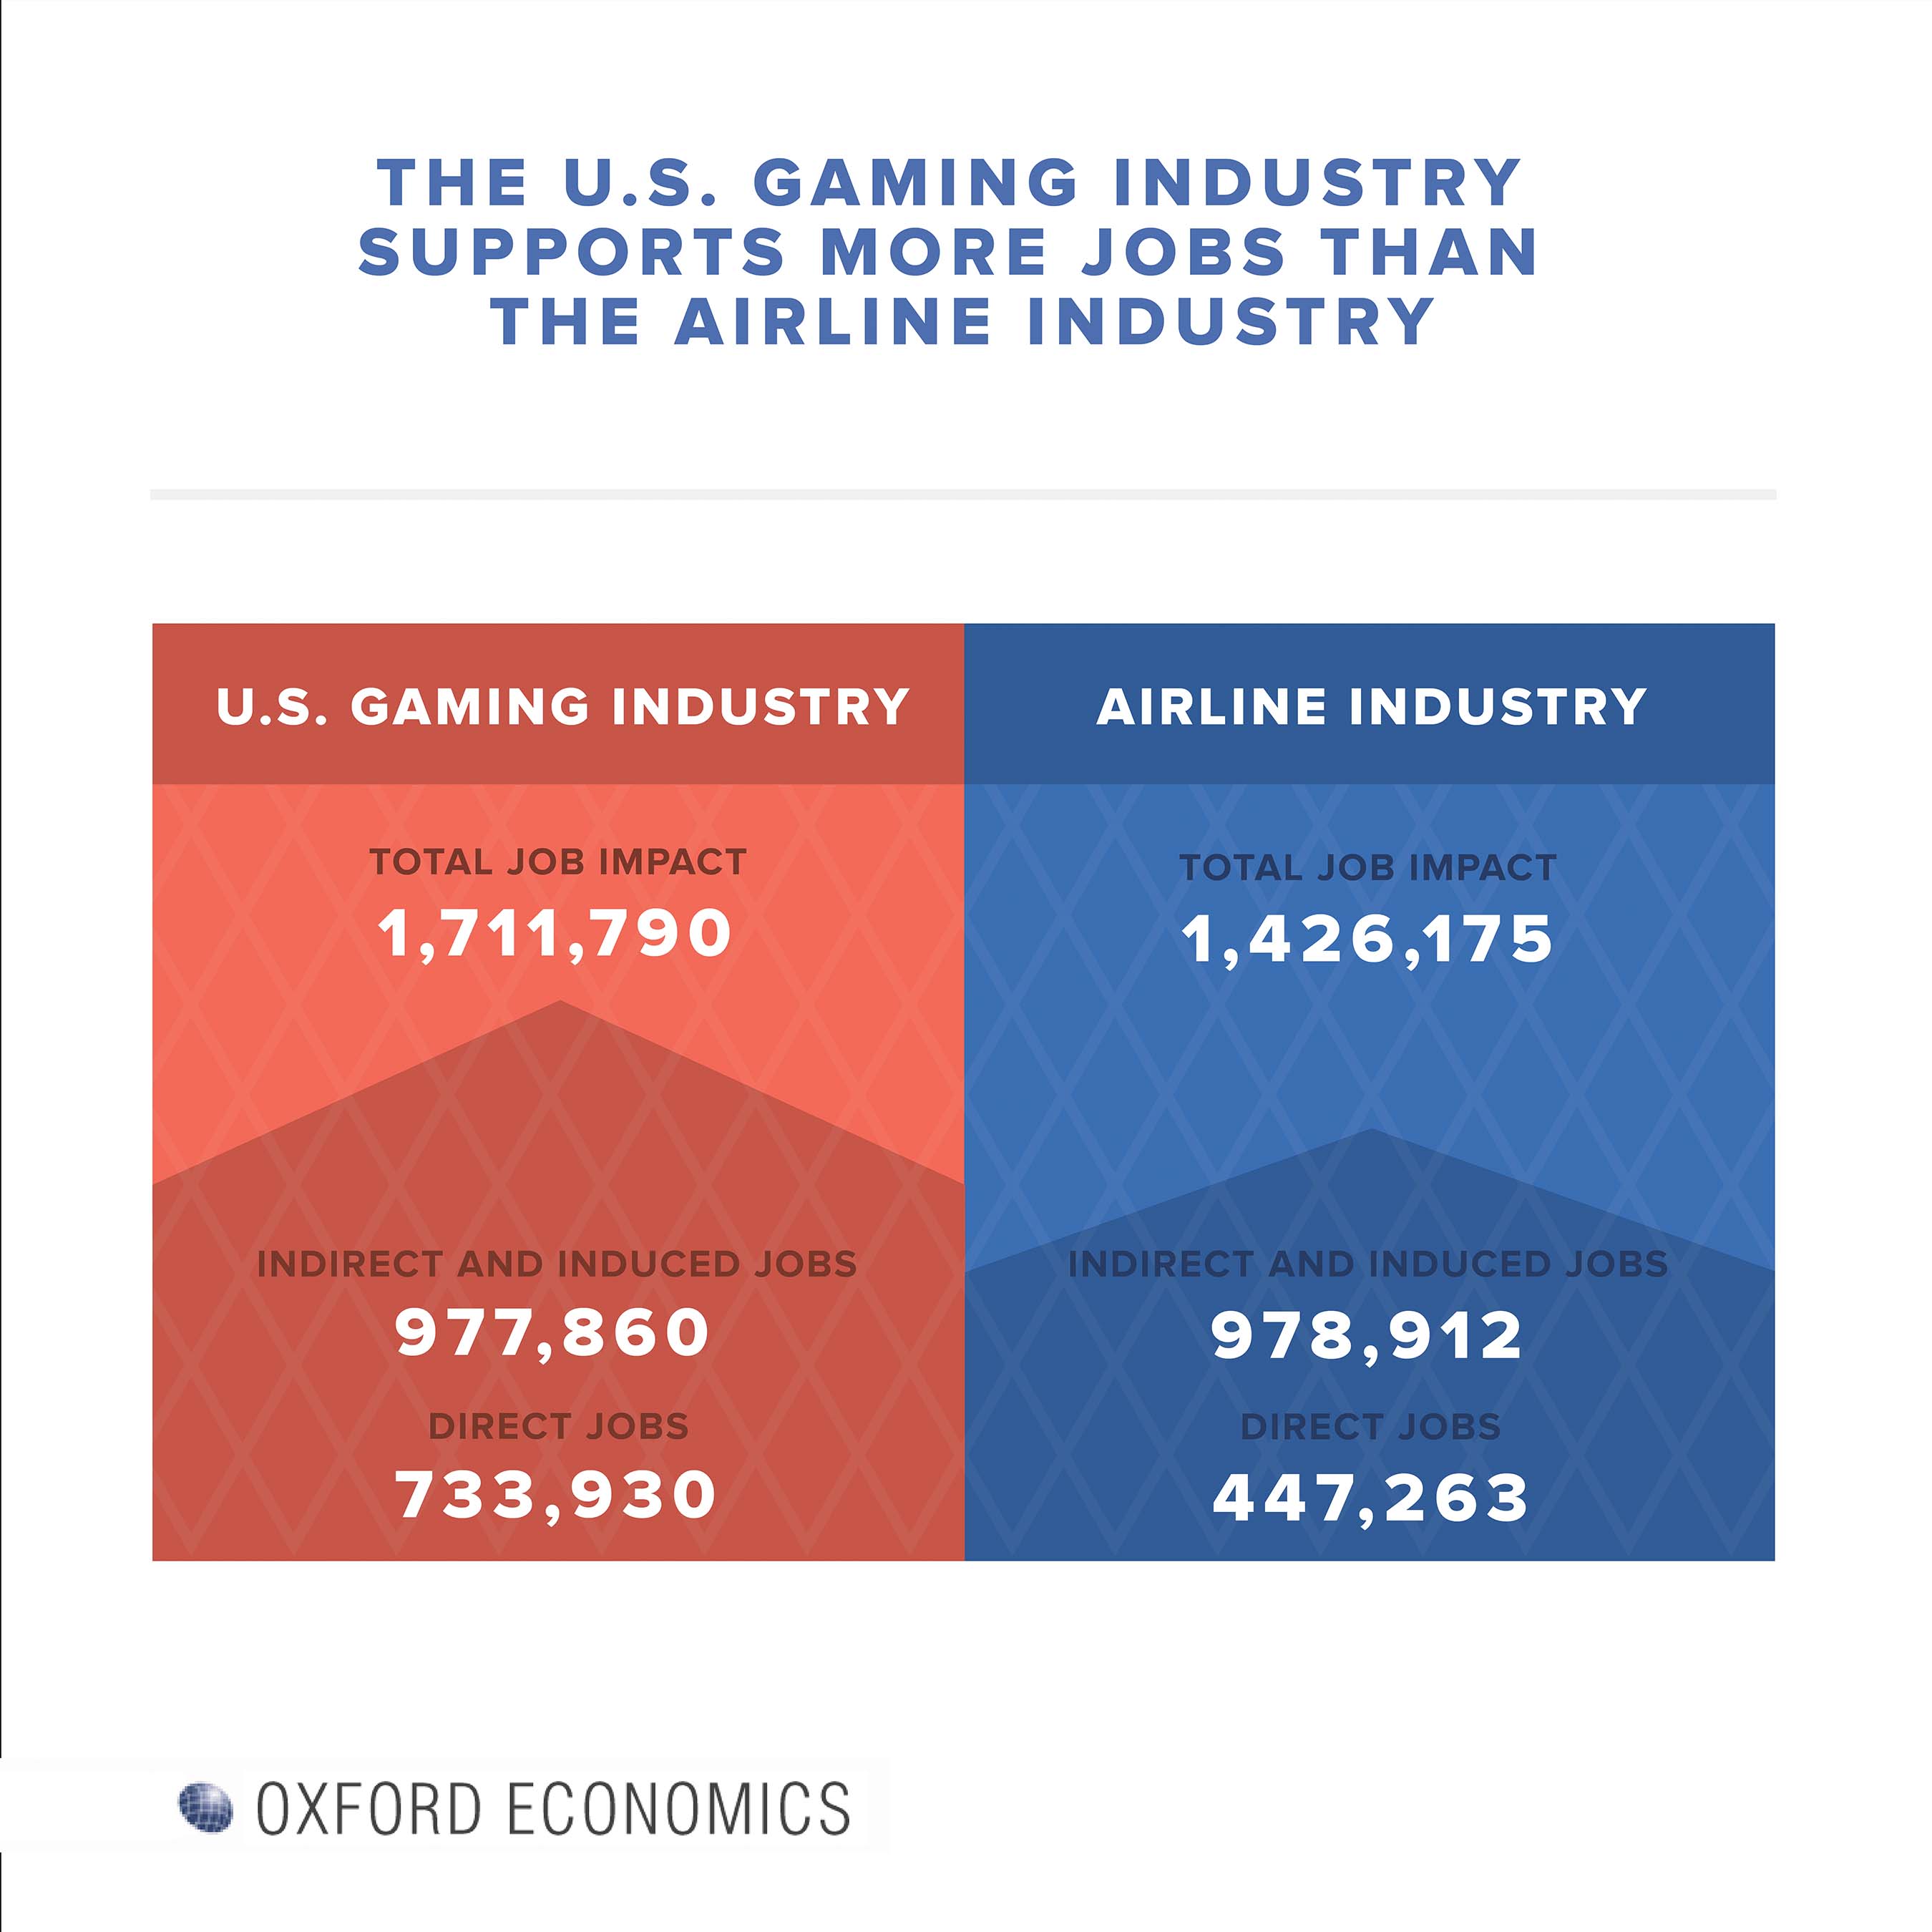 U.S. gaming industry supports more jobs than the airline industry, according to new Oxford Economics’ study.